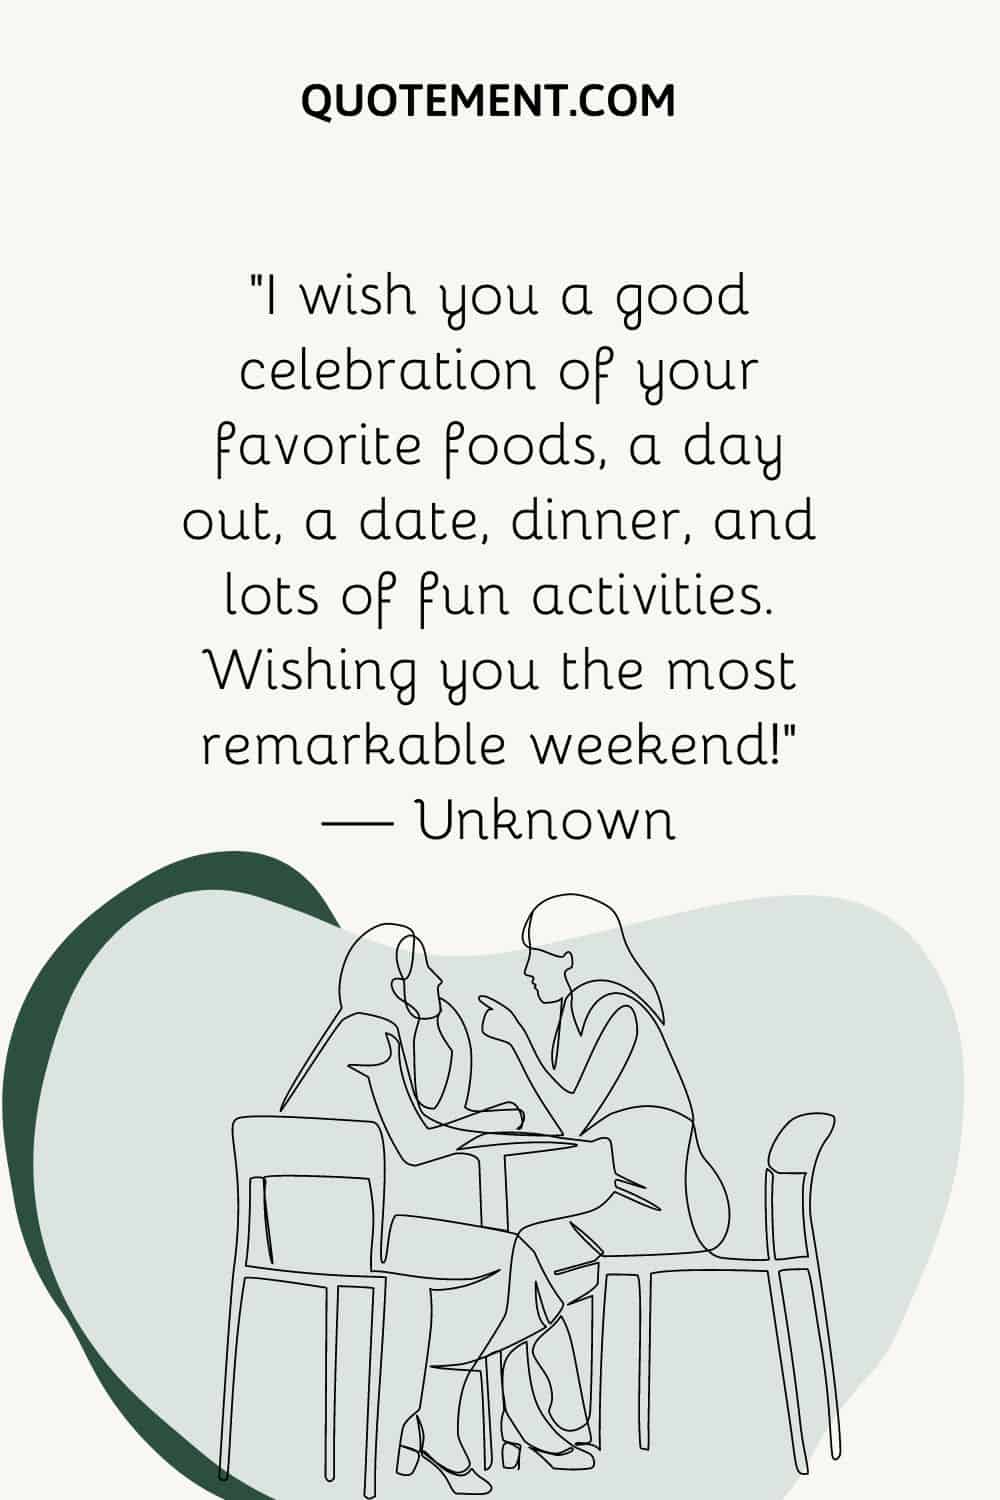 “I wish you a good celebration of your favorite foods, a day out, a date, dinner, and lots of fun activities. Wishing you the most remarkable weekend!” — Unknown